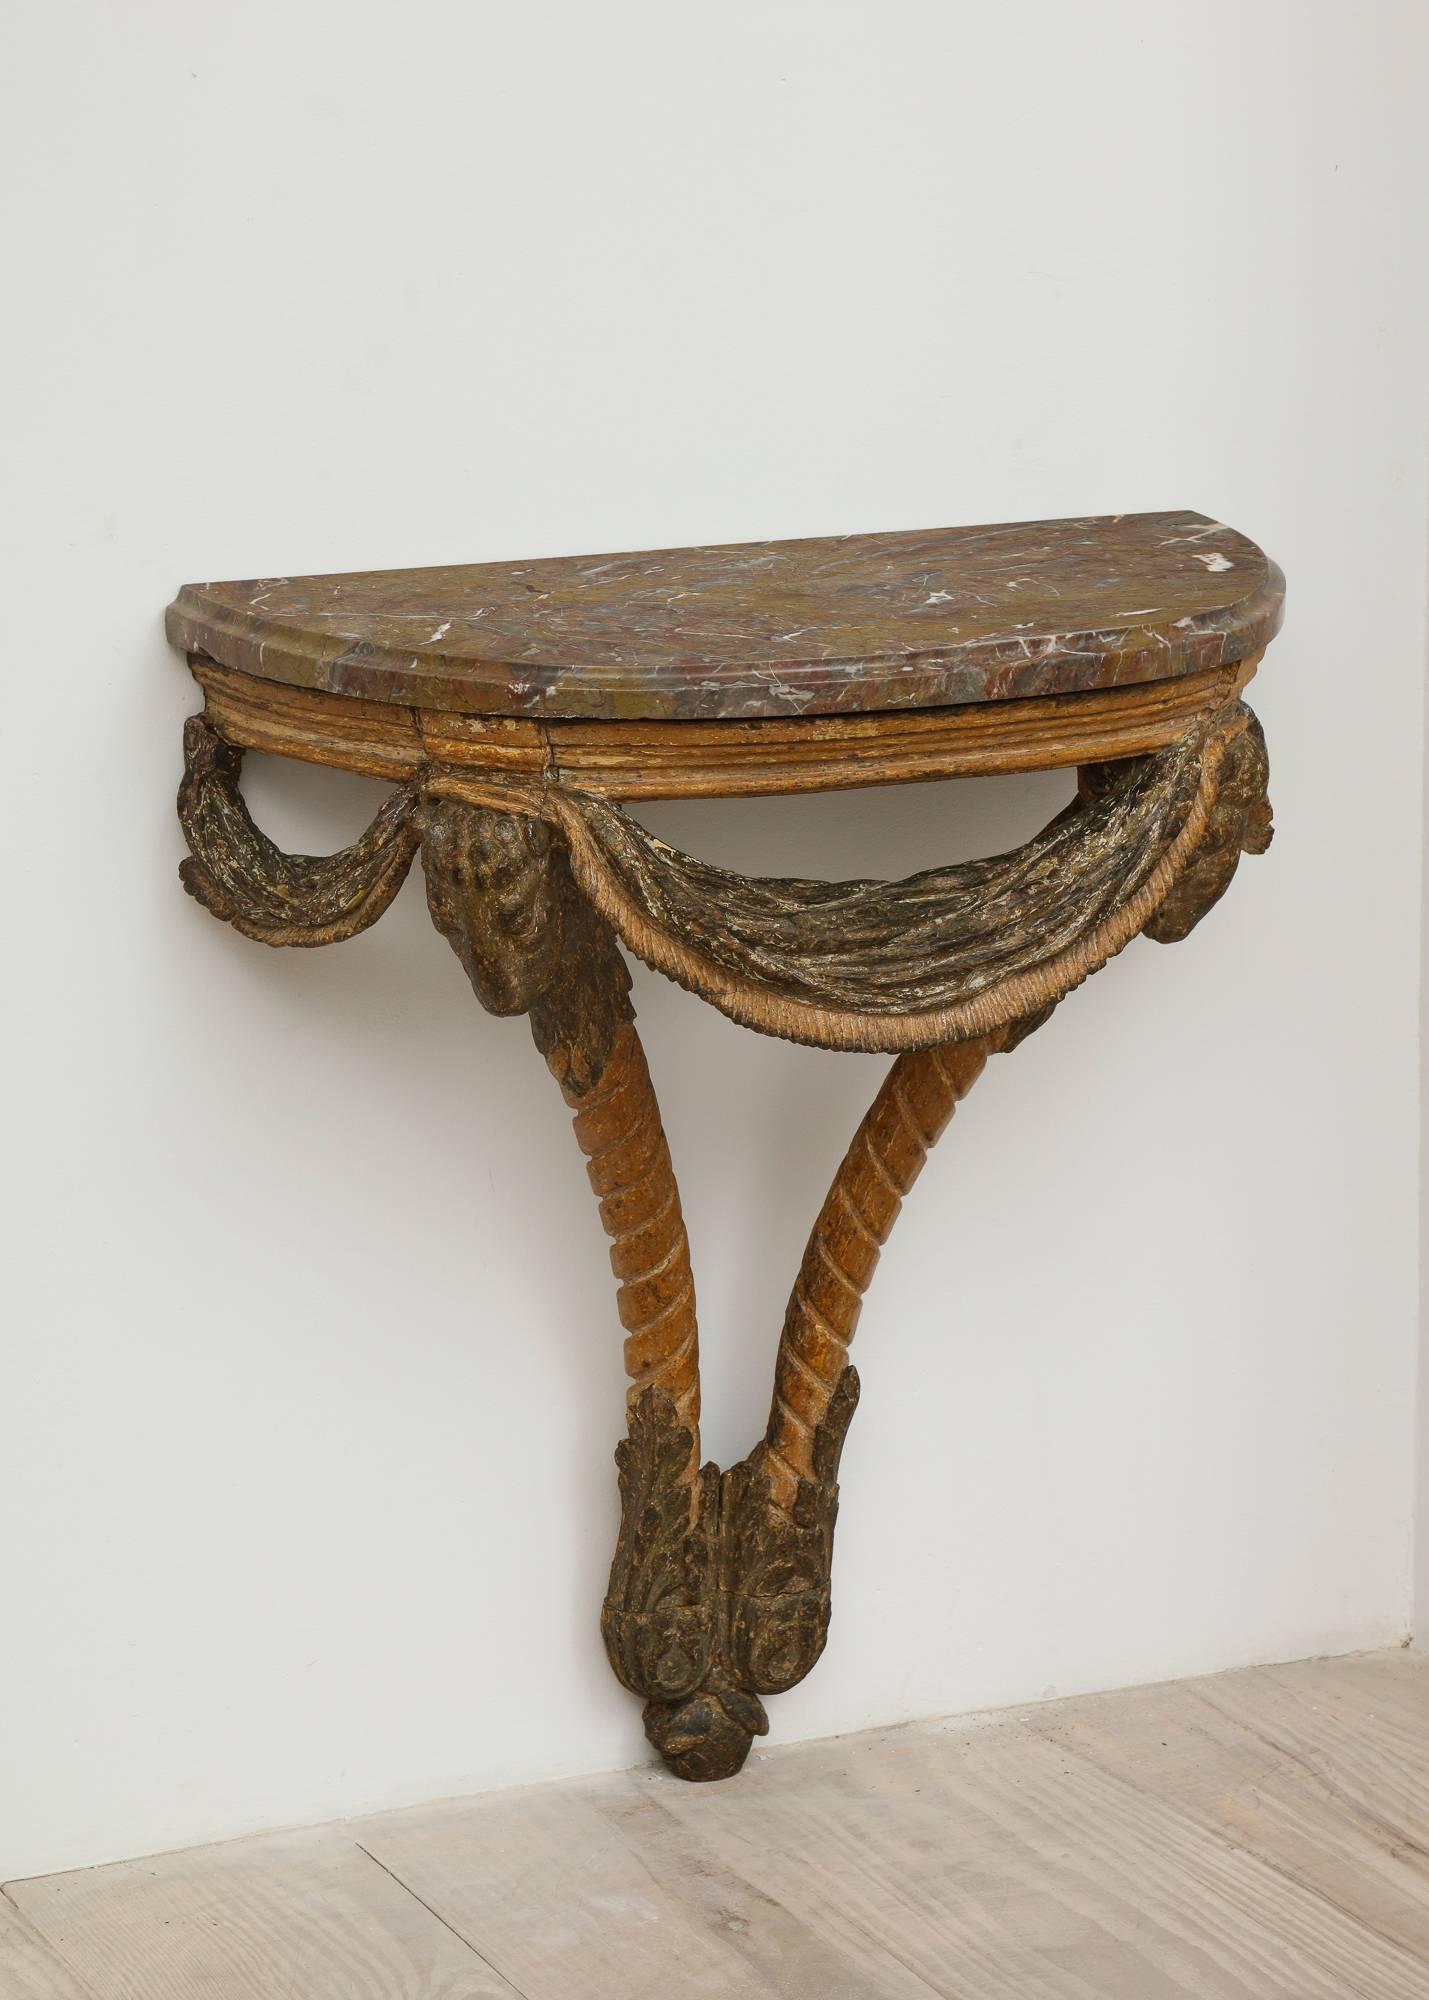 A fine Rococo wall console with exceptionally hand-carved swags, acanthus leaves and rams heads with its original Swedish stone top and original color with a gorgeous patina, circa 1750, origin: Stockholm, Sweden.

 